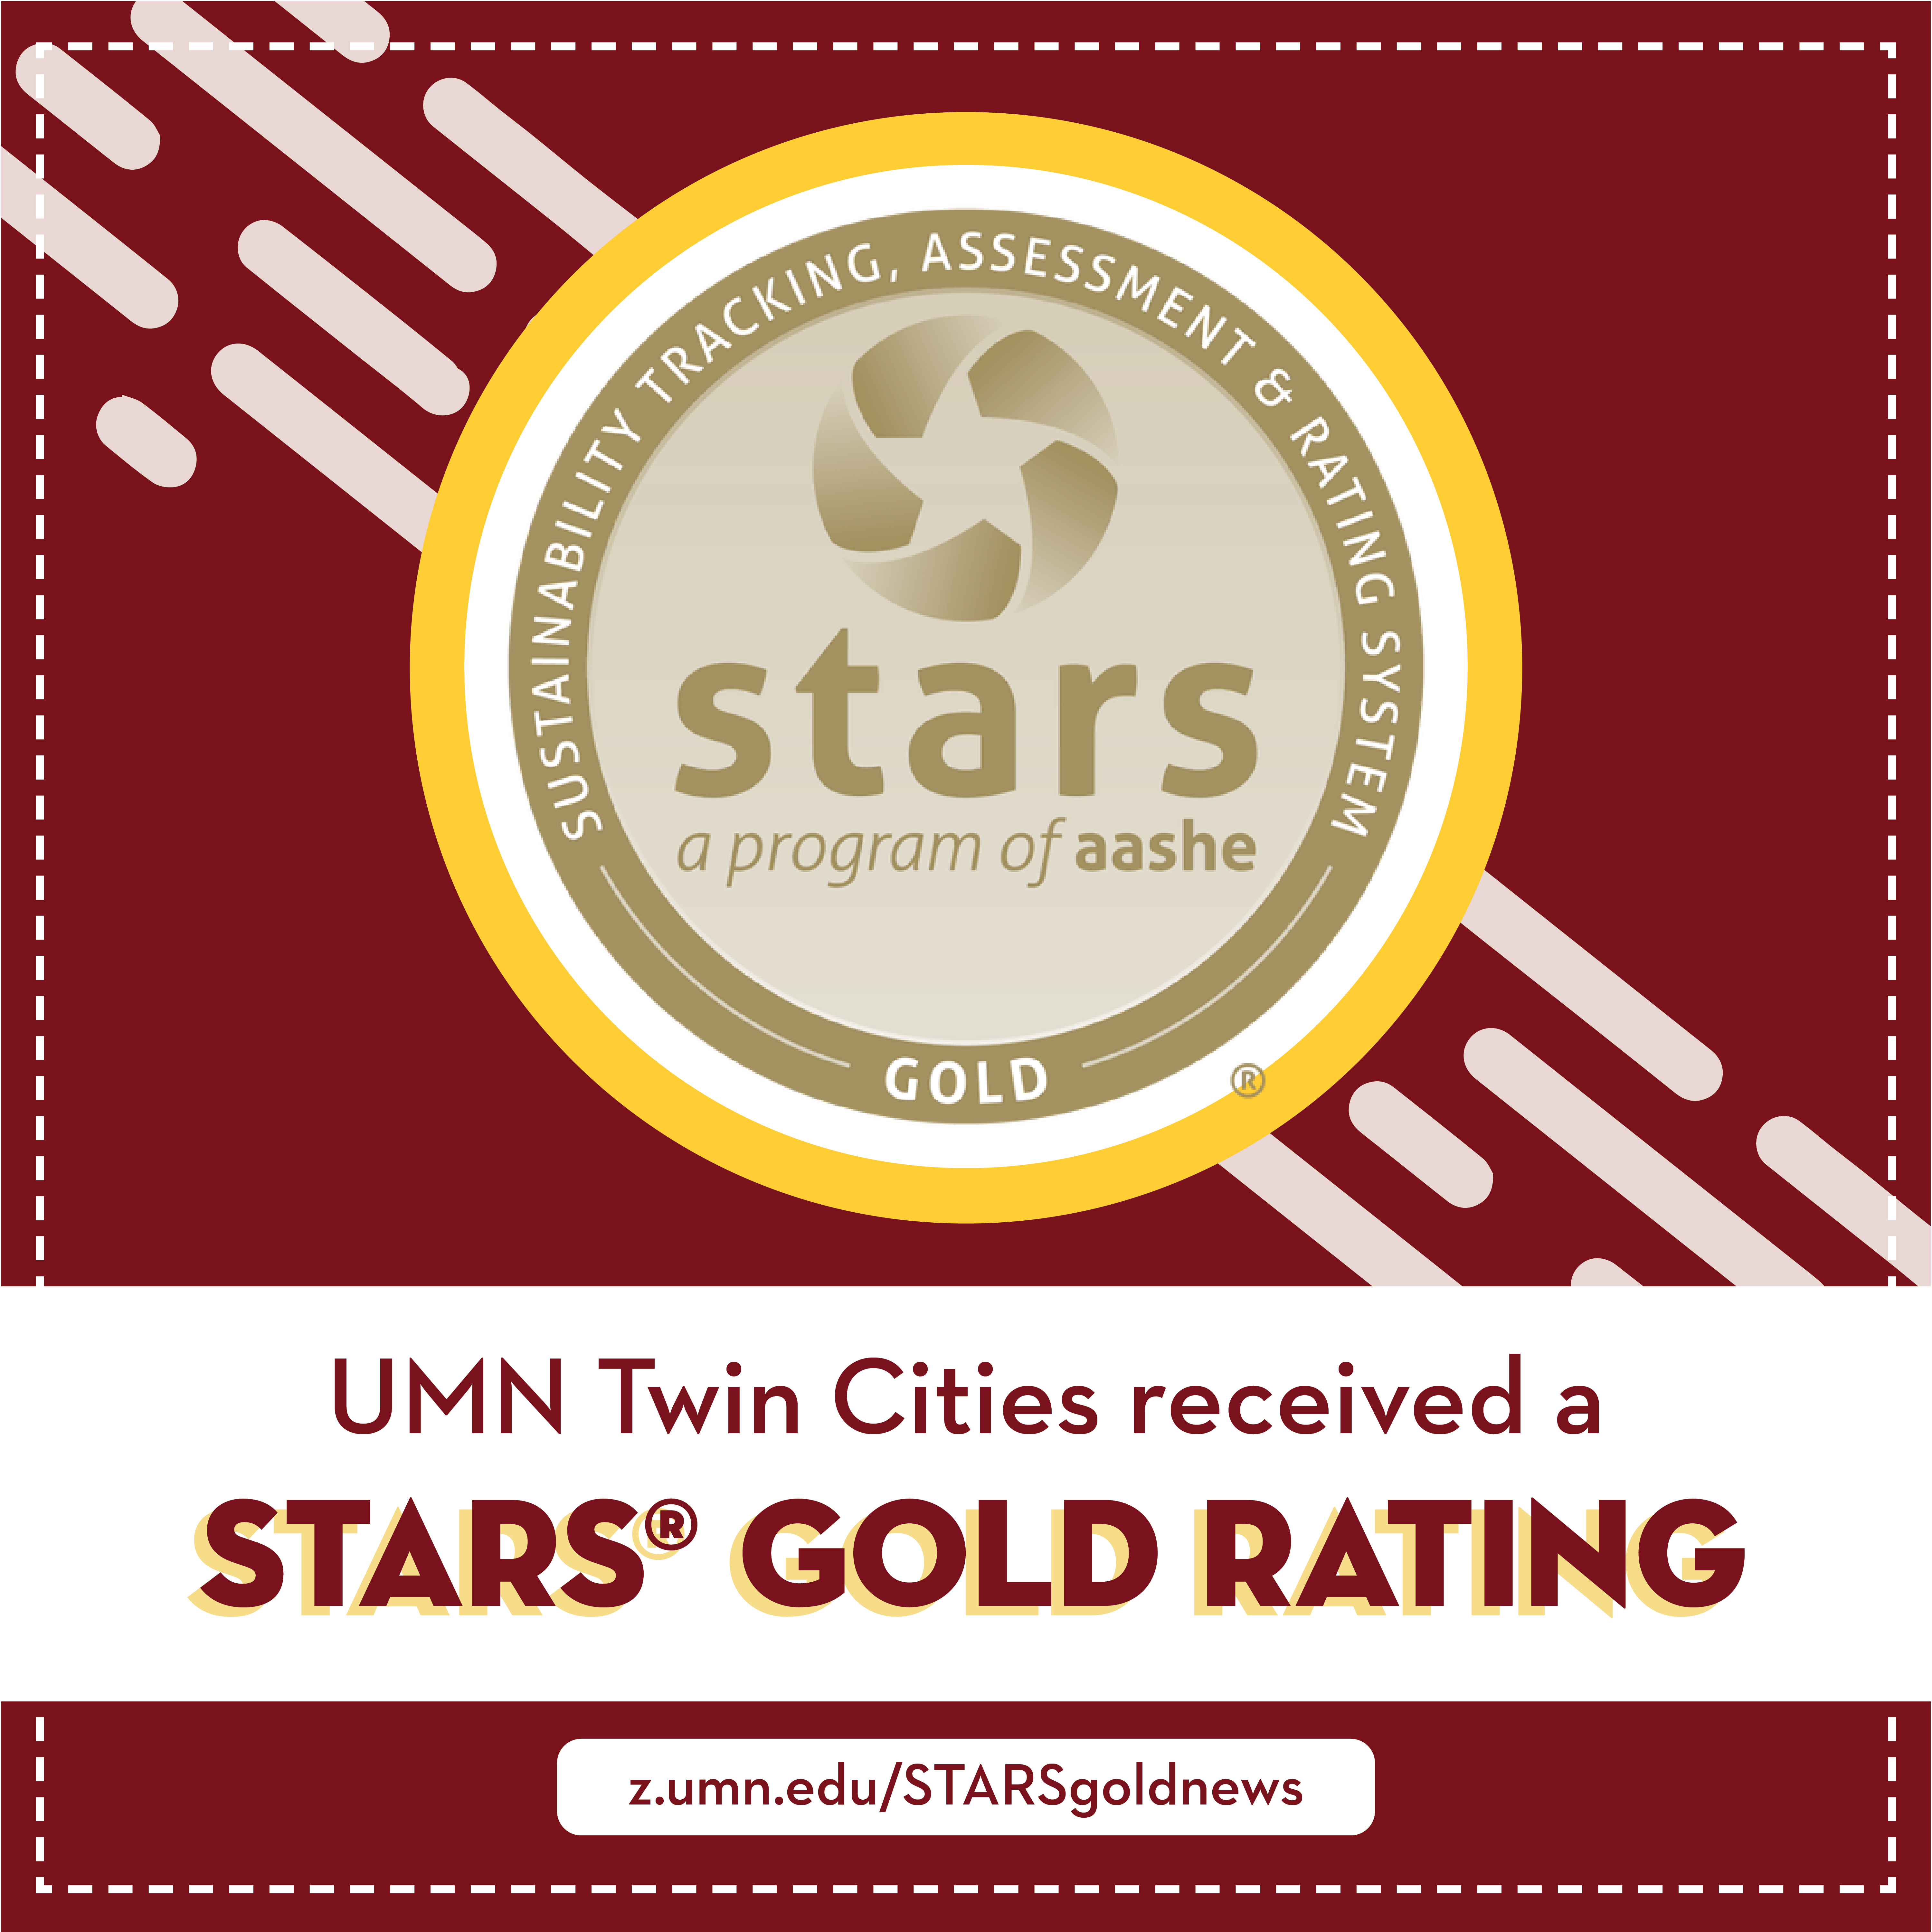 UMN Twin Cities Stars Gold Rating